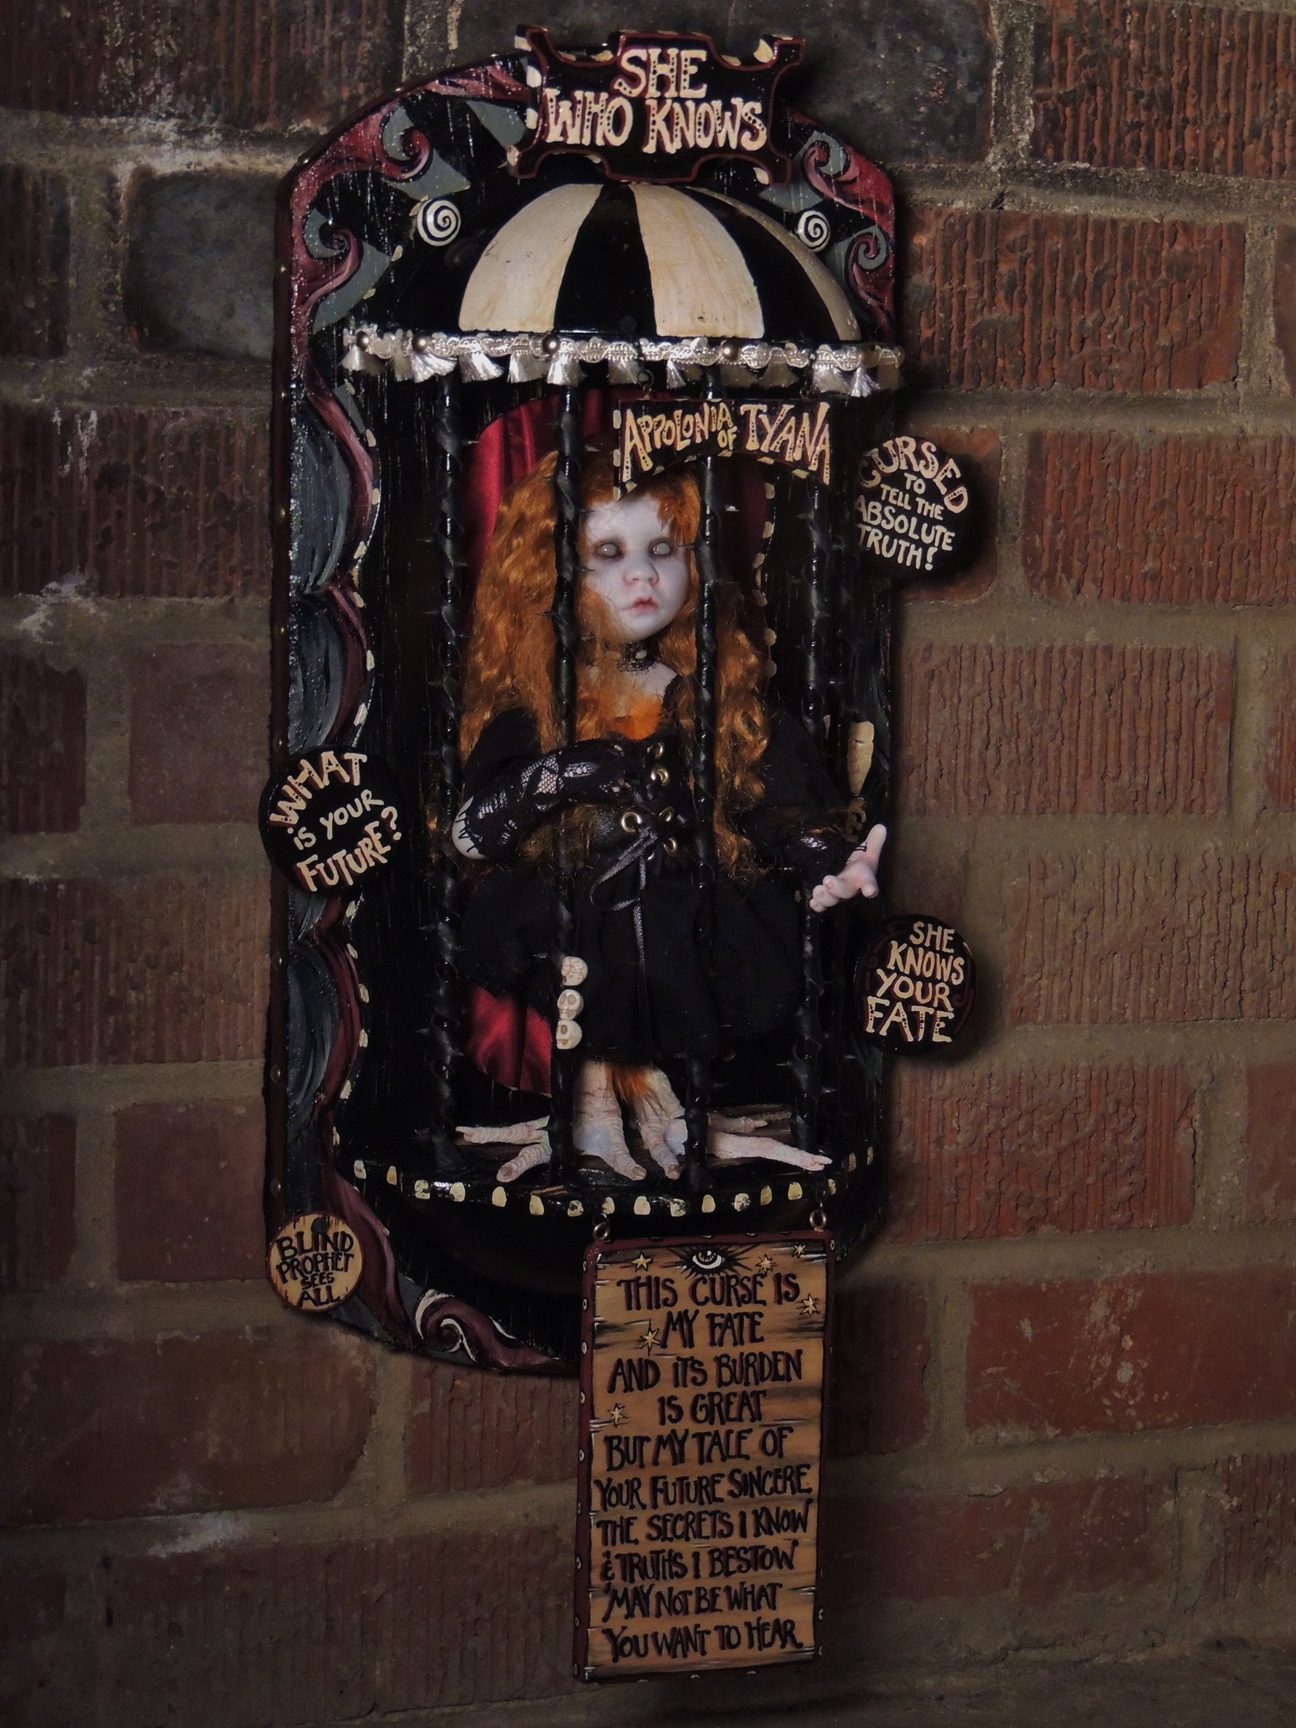 gothic redheaded blind seer artdoll with taxidermy birdfeet trapped in a circus themed black thorny cage with hand-painted signs on it wall-mounted